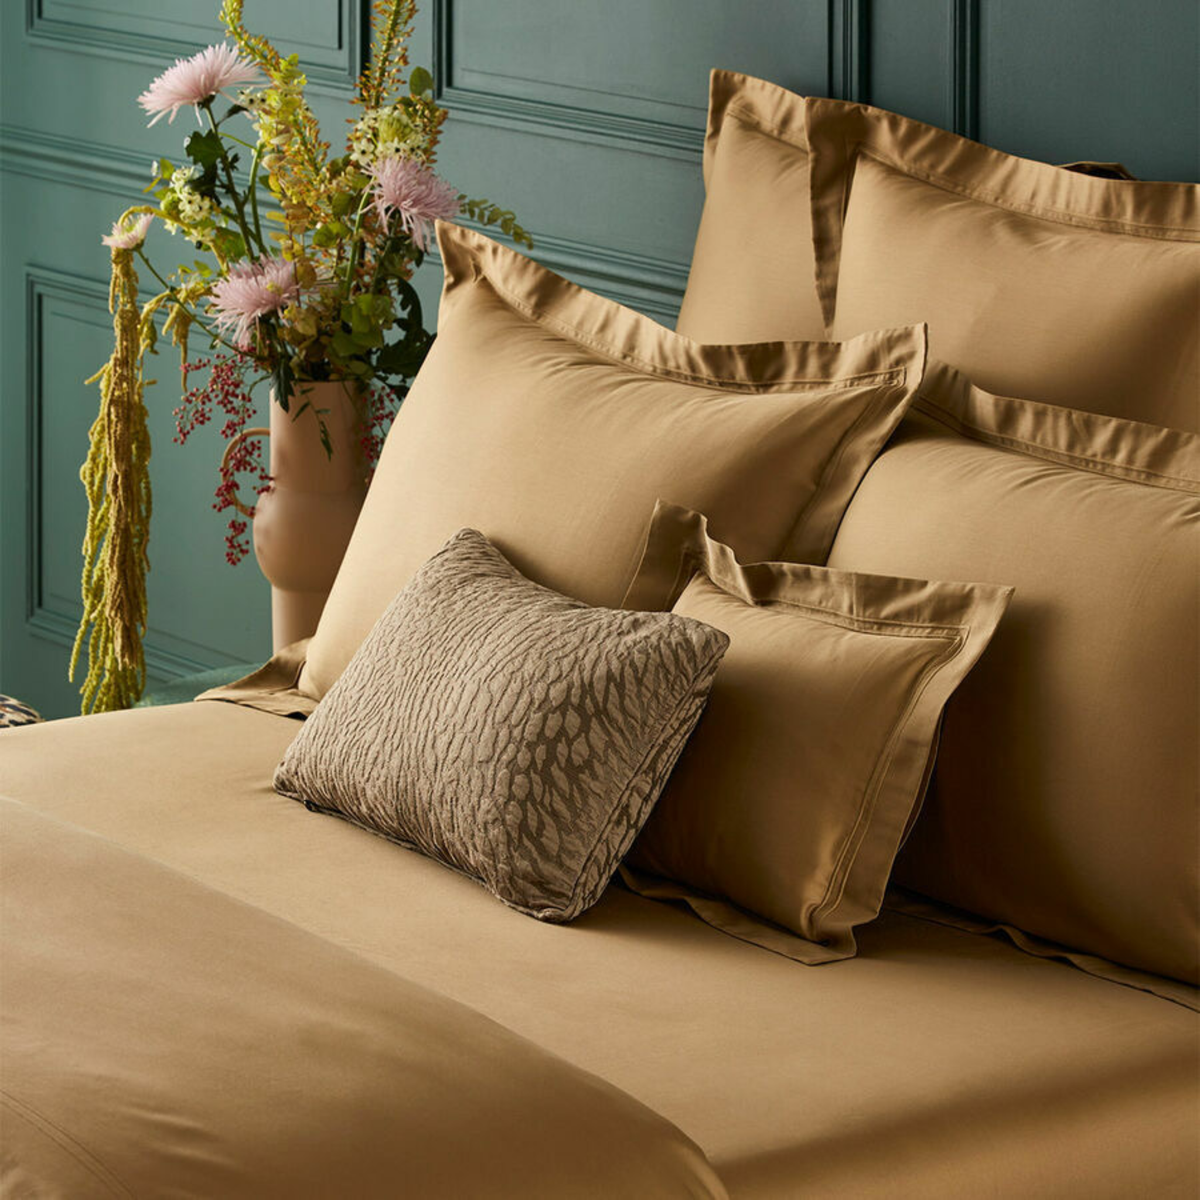 Shams and Pillows of Yves Delorme Triomphe Bedding in Bronze Color